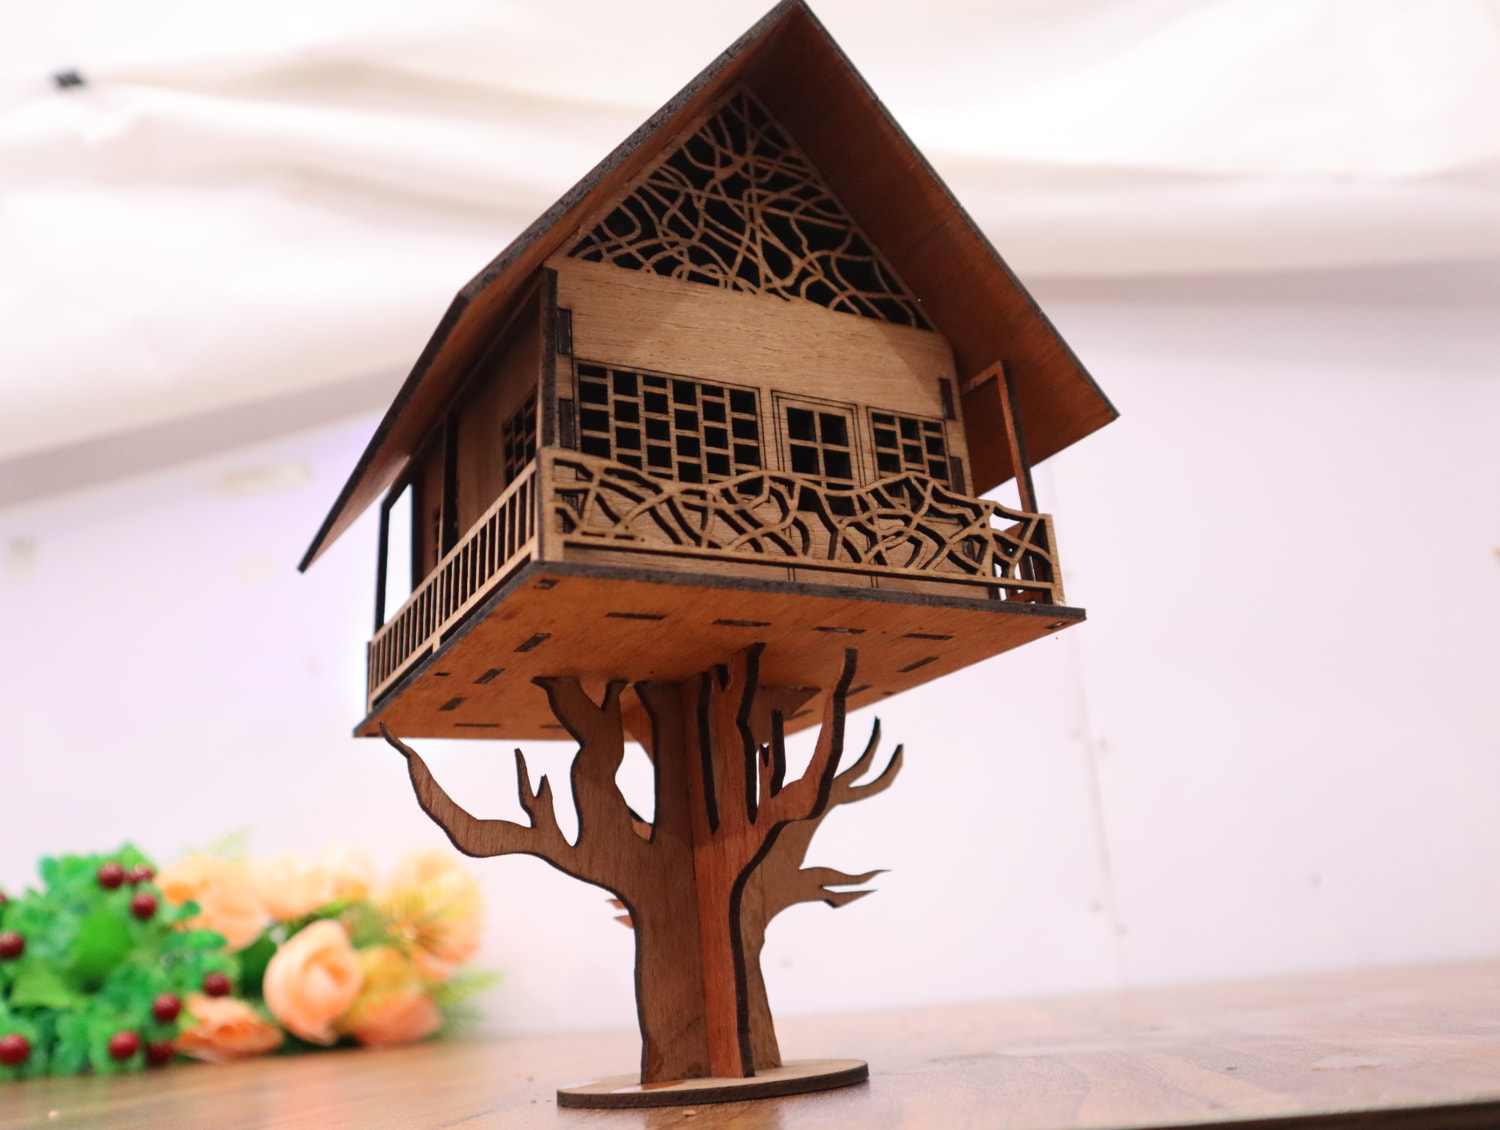 Laser Cut Tree House 3mm Free Vector